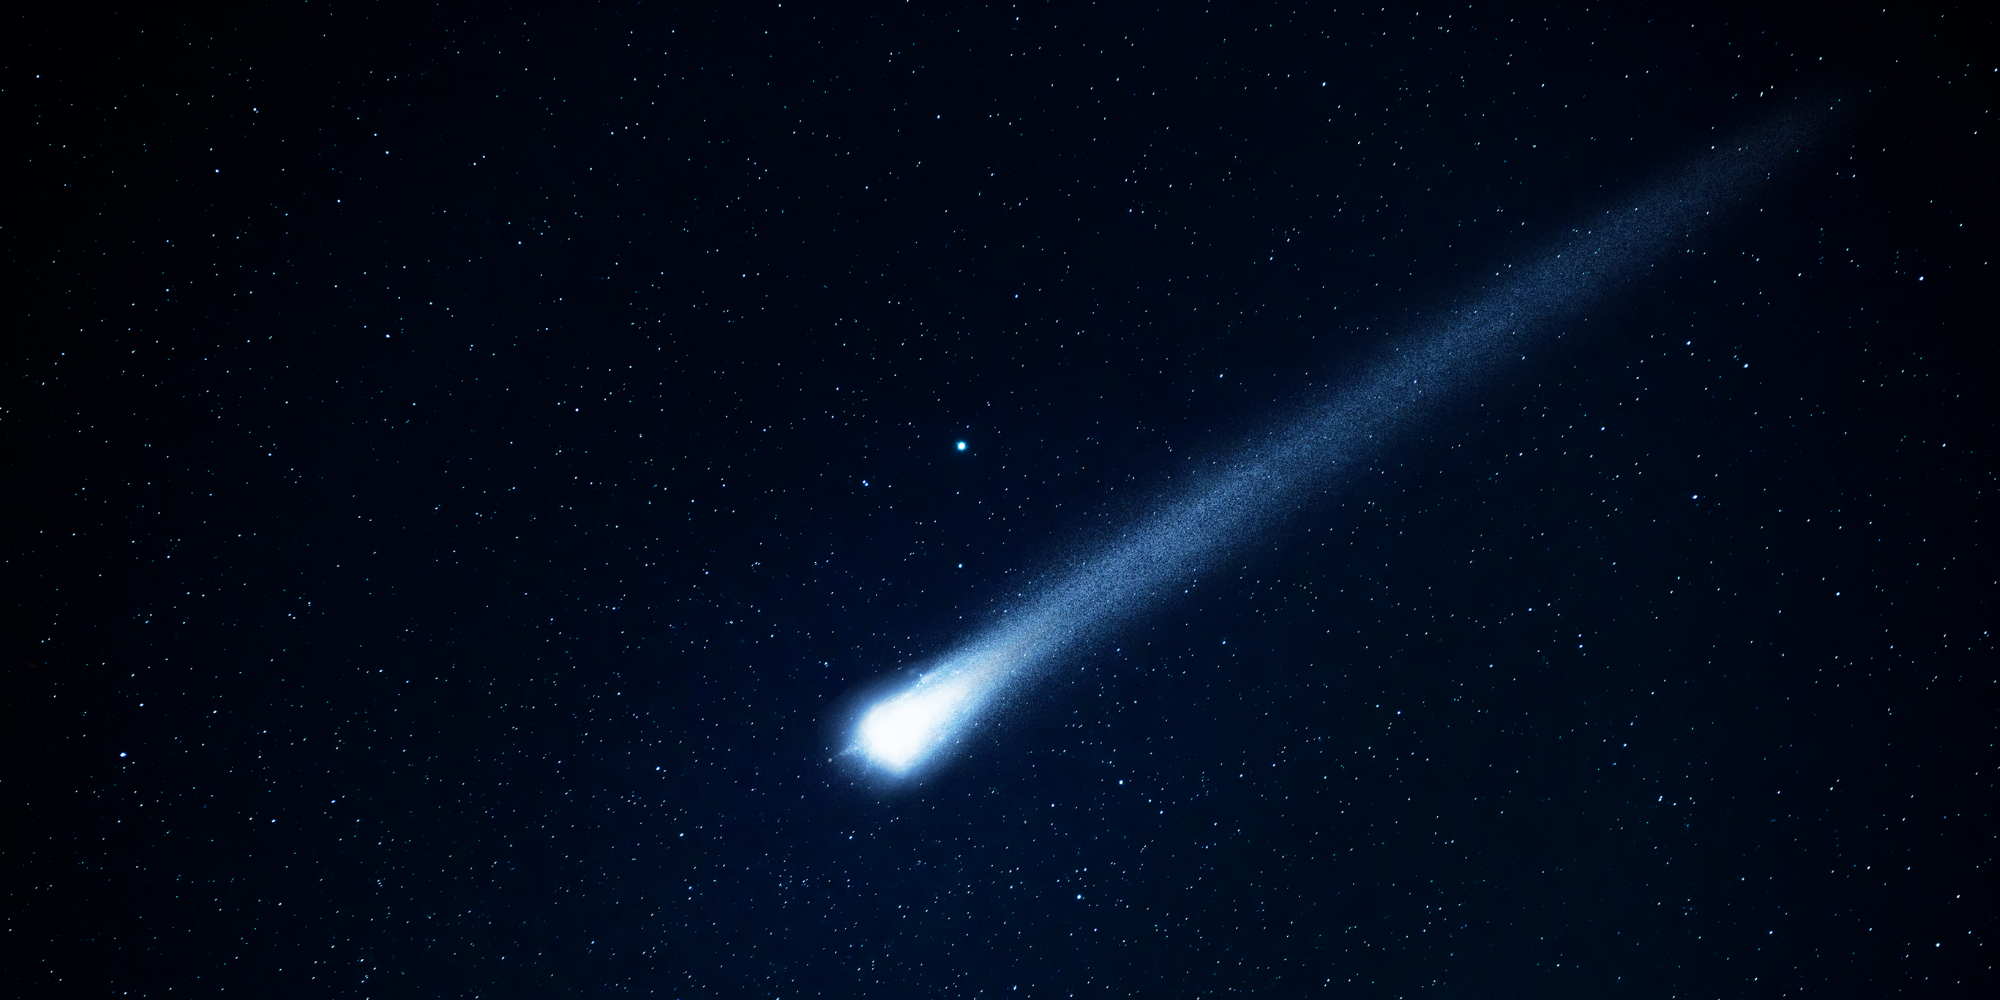 This recordbreaking comet tail is over 1 billion kilometers long